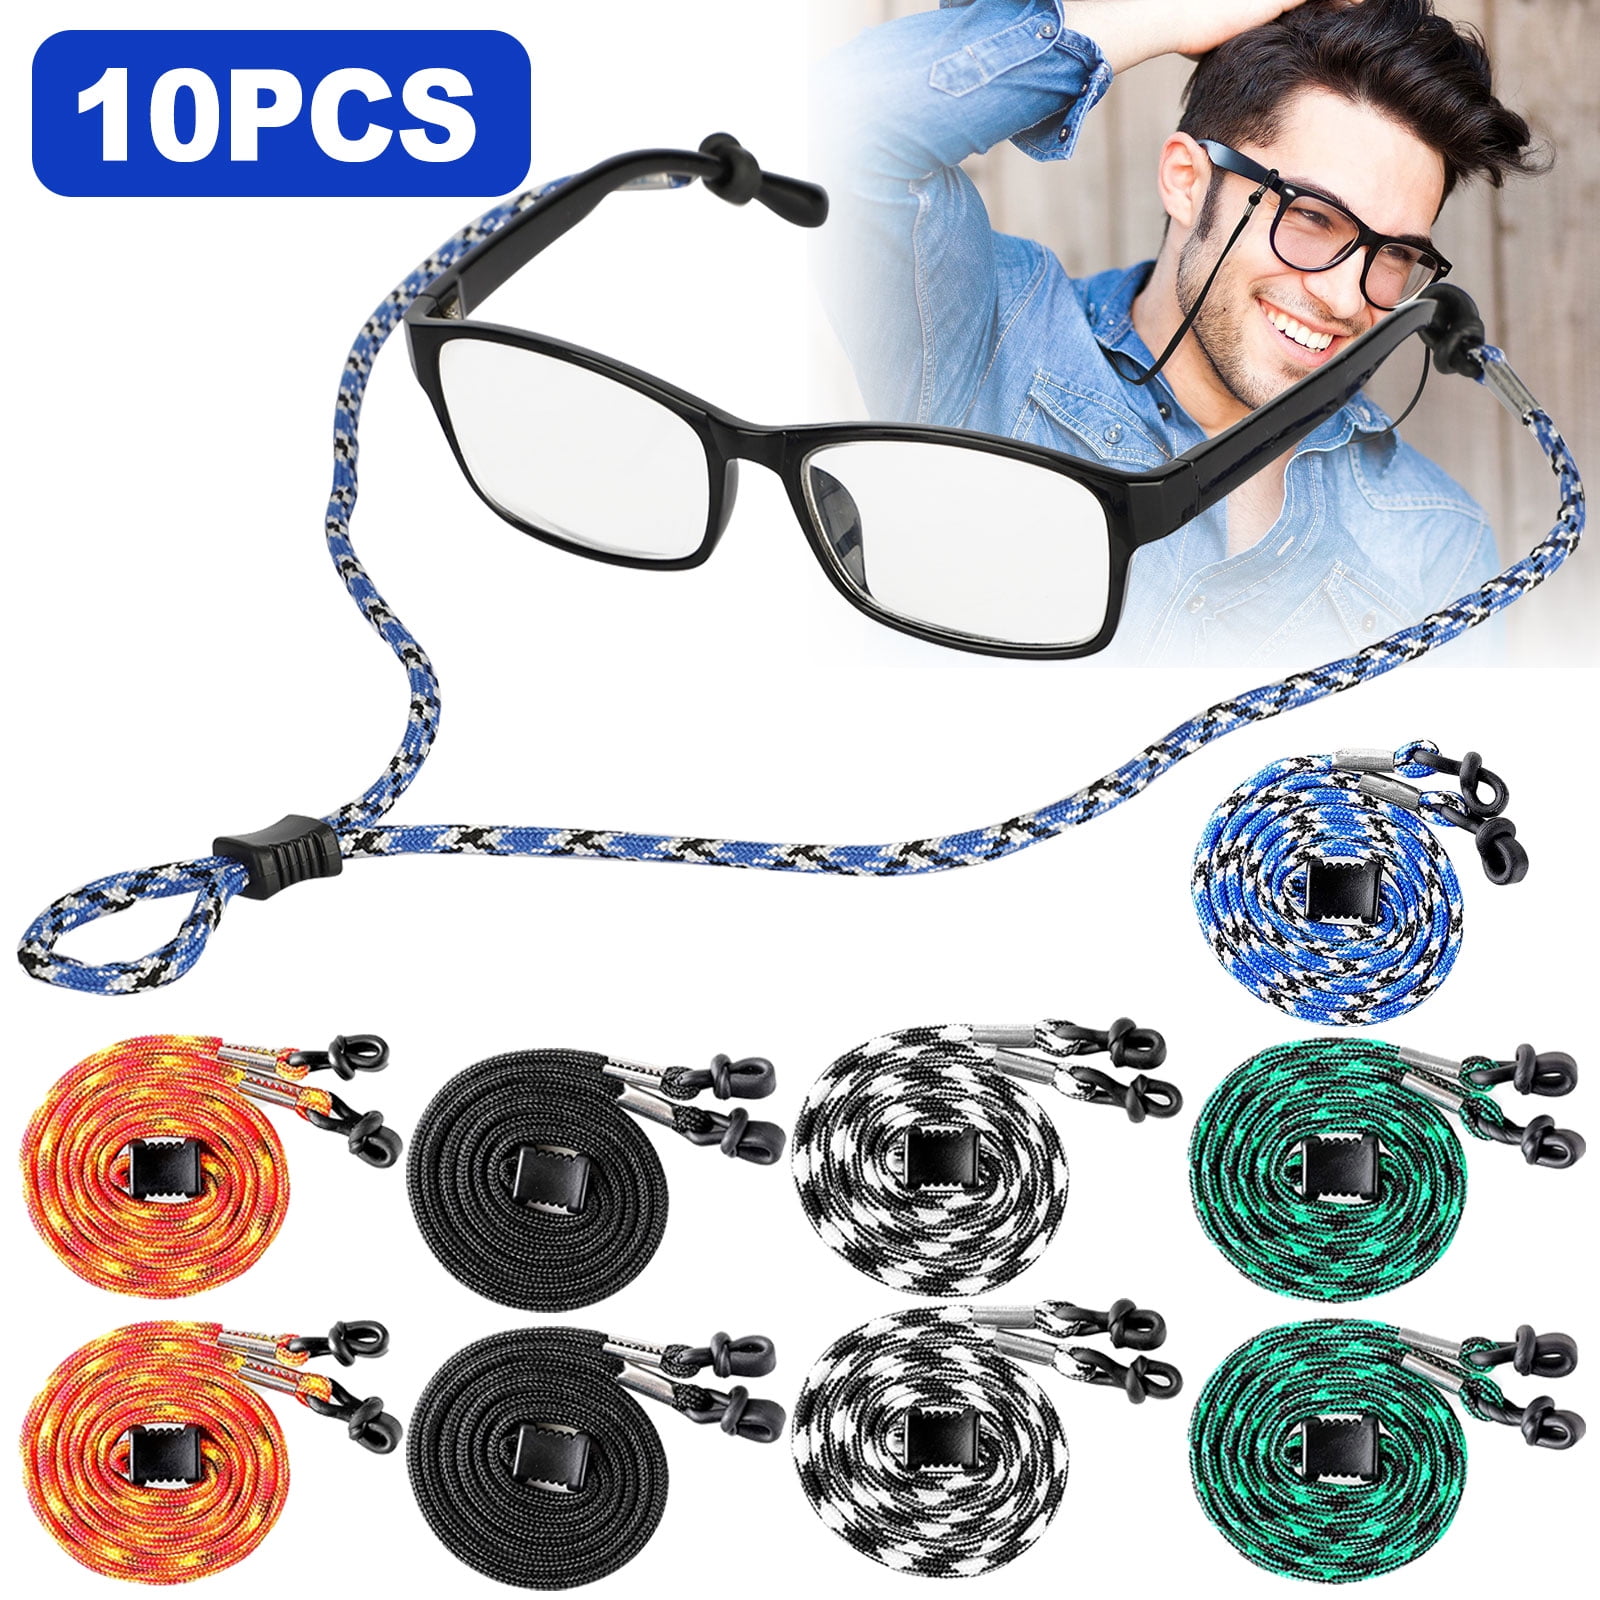 10 Pcs【Multicolor】Sunglass Holder Strap Safety Glasses Neck Cord String Eyewear Retainer Strap,Adjustable Fixed Eyeglasses Lanyard Great for Sports and Outdoor Activities【Gift Packaging】 